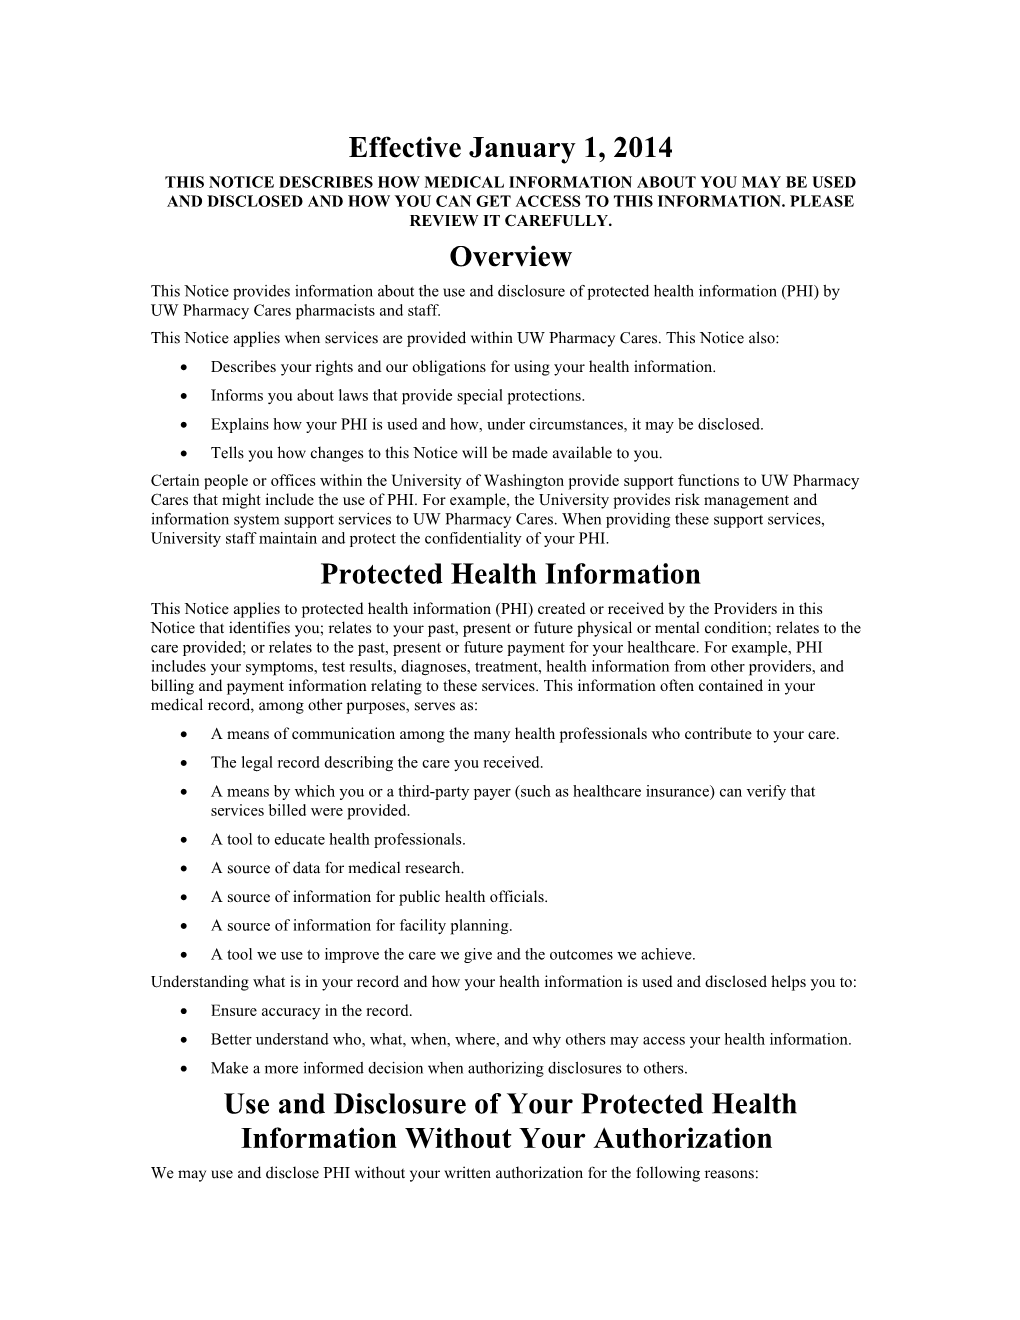 This Notice Describes How Medical Information About You May Be Used and Disclosed And